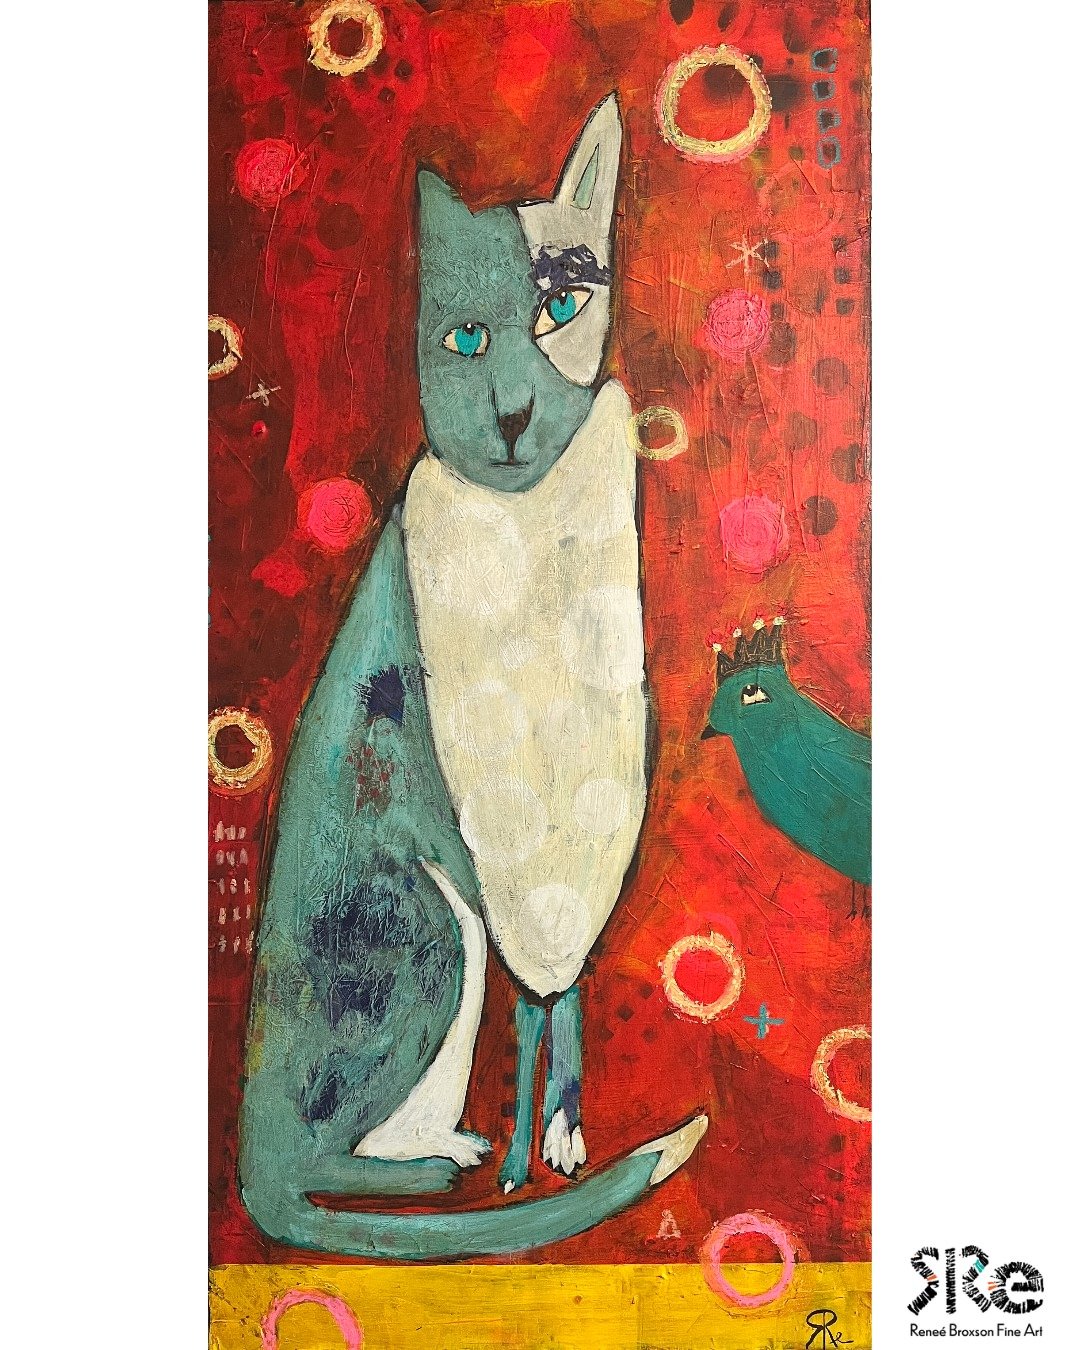 &ldquo;Kitty and Bird&rdquo; have formed an unlikely friendship. This mixed media painting measures 20&rdquo; x 40&rdquo; on birch wood panel.

You can visit this crew in person at @culturalartsalliance's ArtsQuest this weekend 5/4 - 5/5 in booth 43 